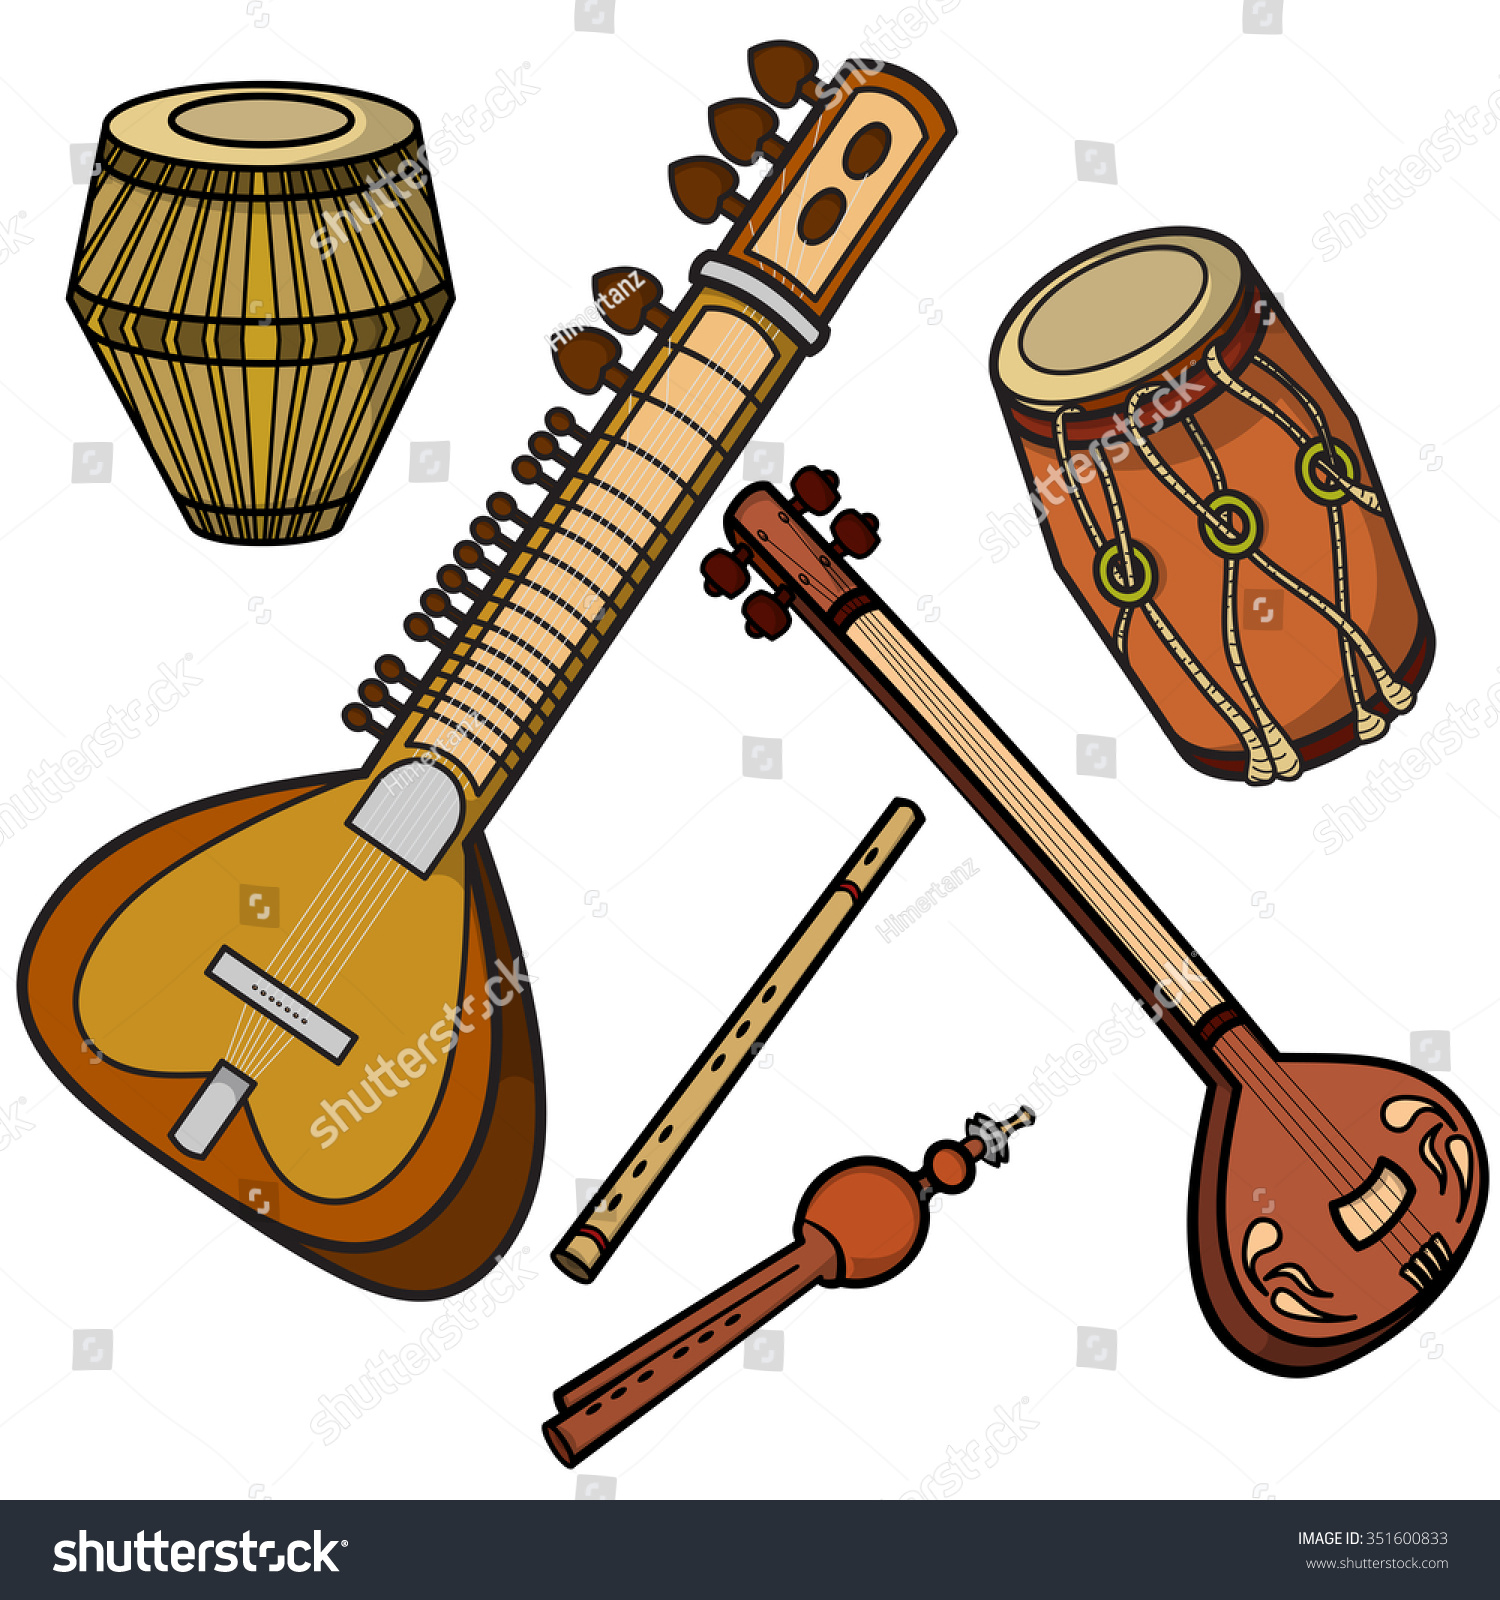 Images Of Traditional Indian Musical Instruments - 10 Popular Traditional Indian Musical Instruments For Folk And Classical Music Hubpages - Find & download free graphic resources for indian musical instruments.